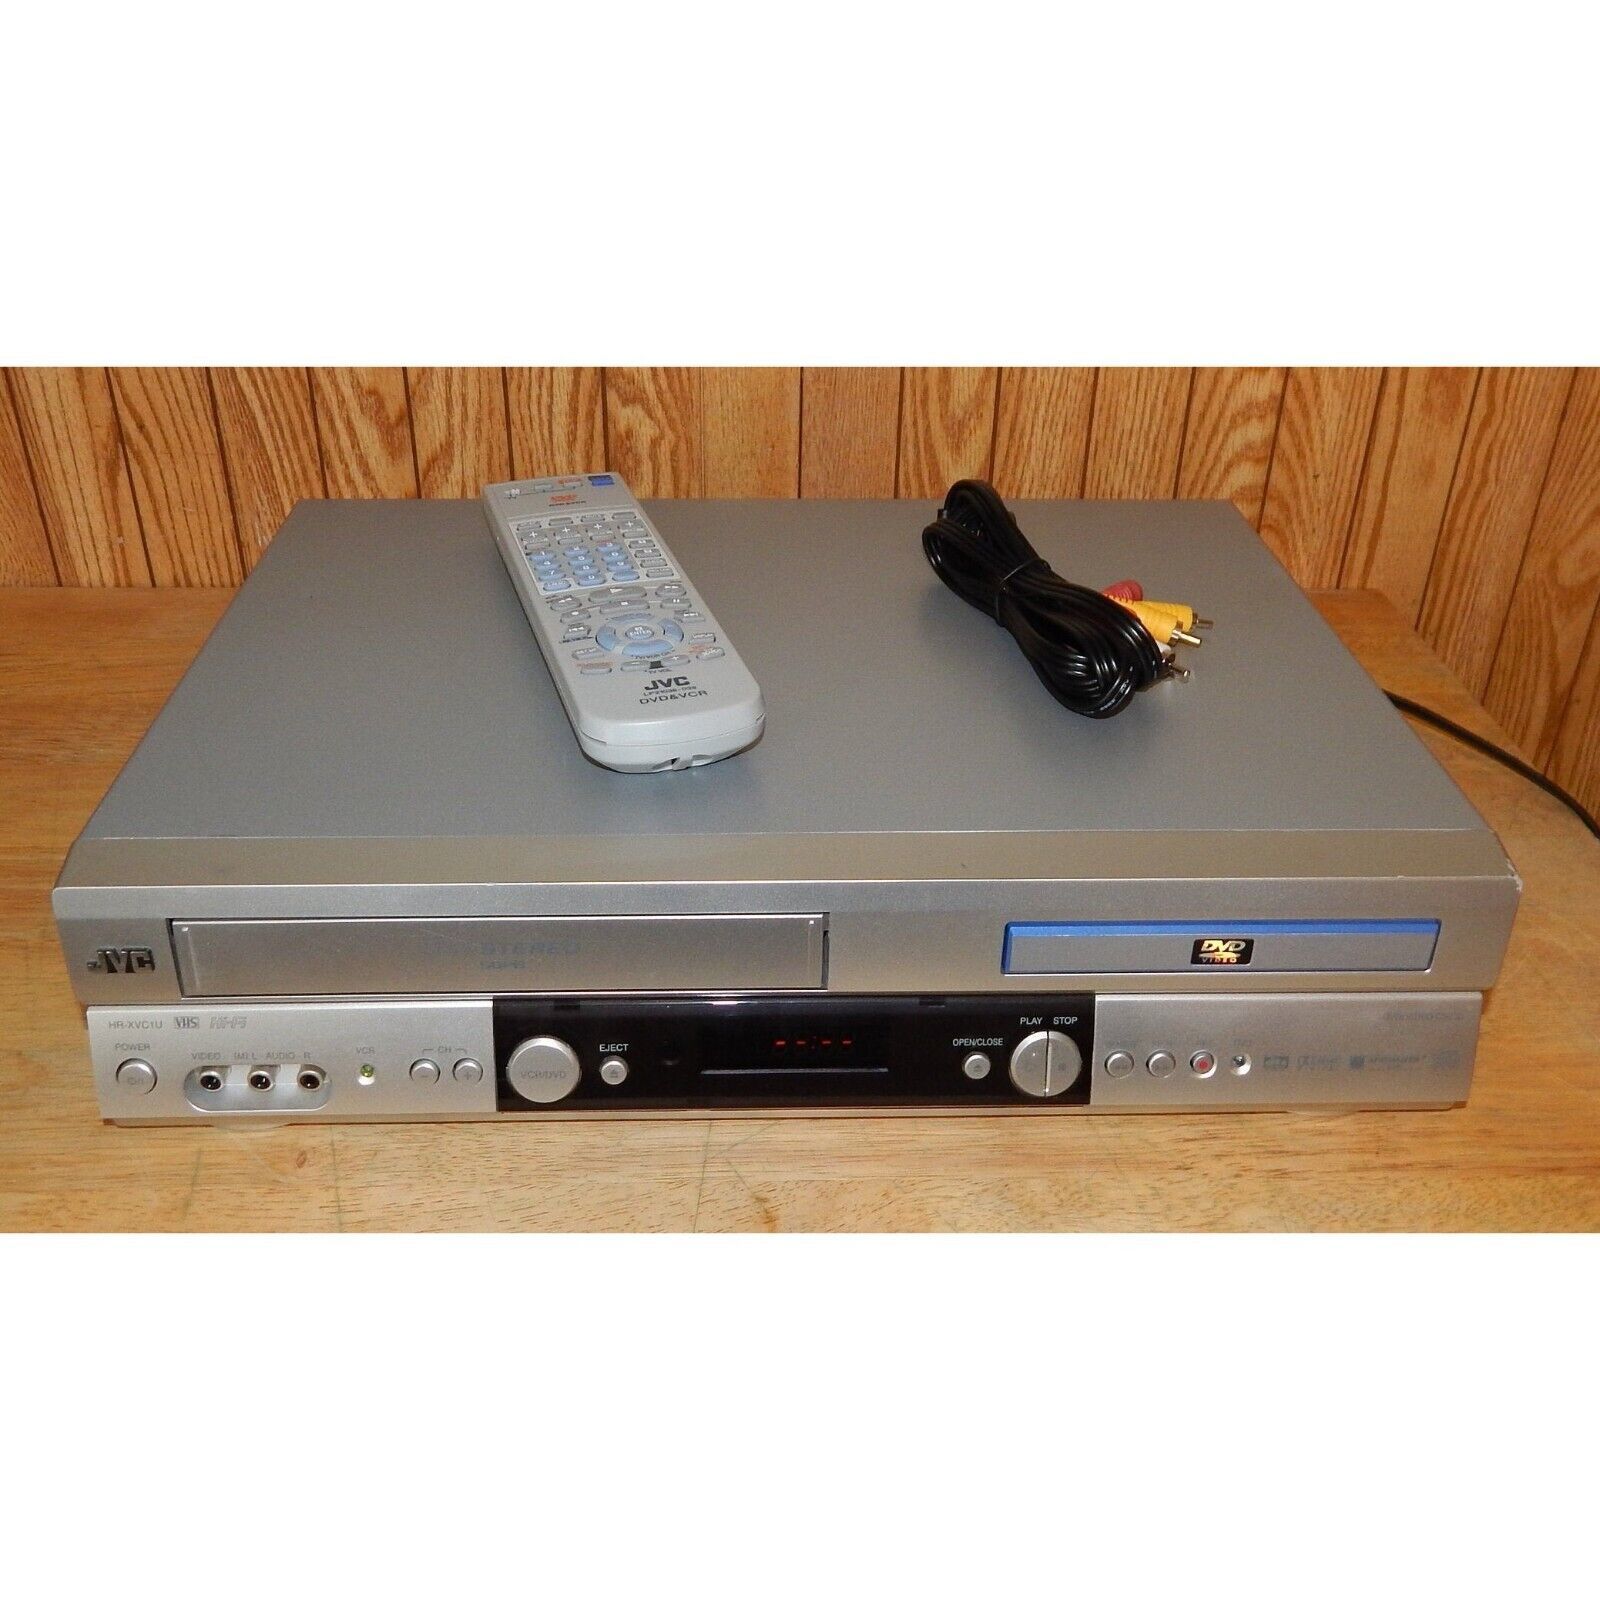 Primary image for JVC Hr-XVC1U DVD VCR Combo with Remote, Cables and Hdmi Adapter